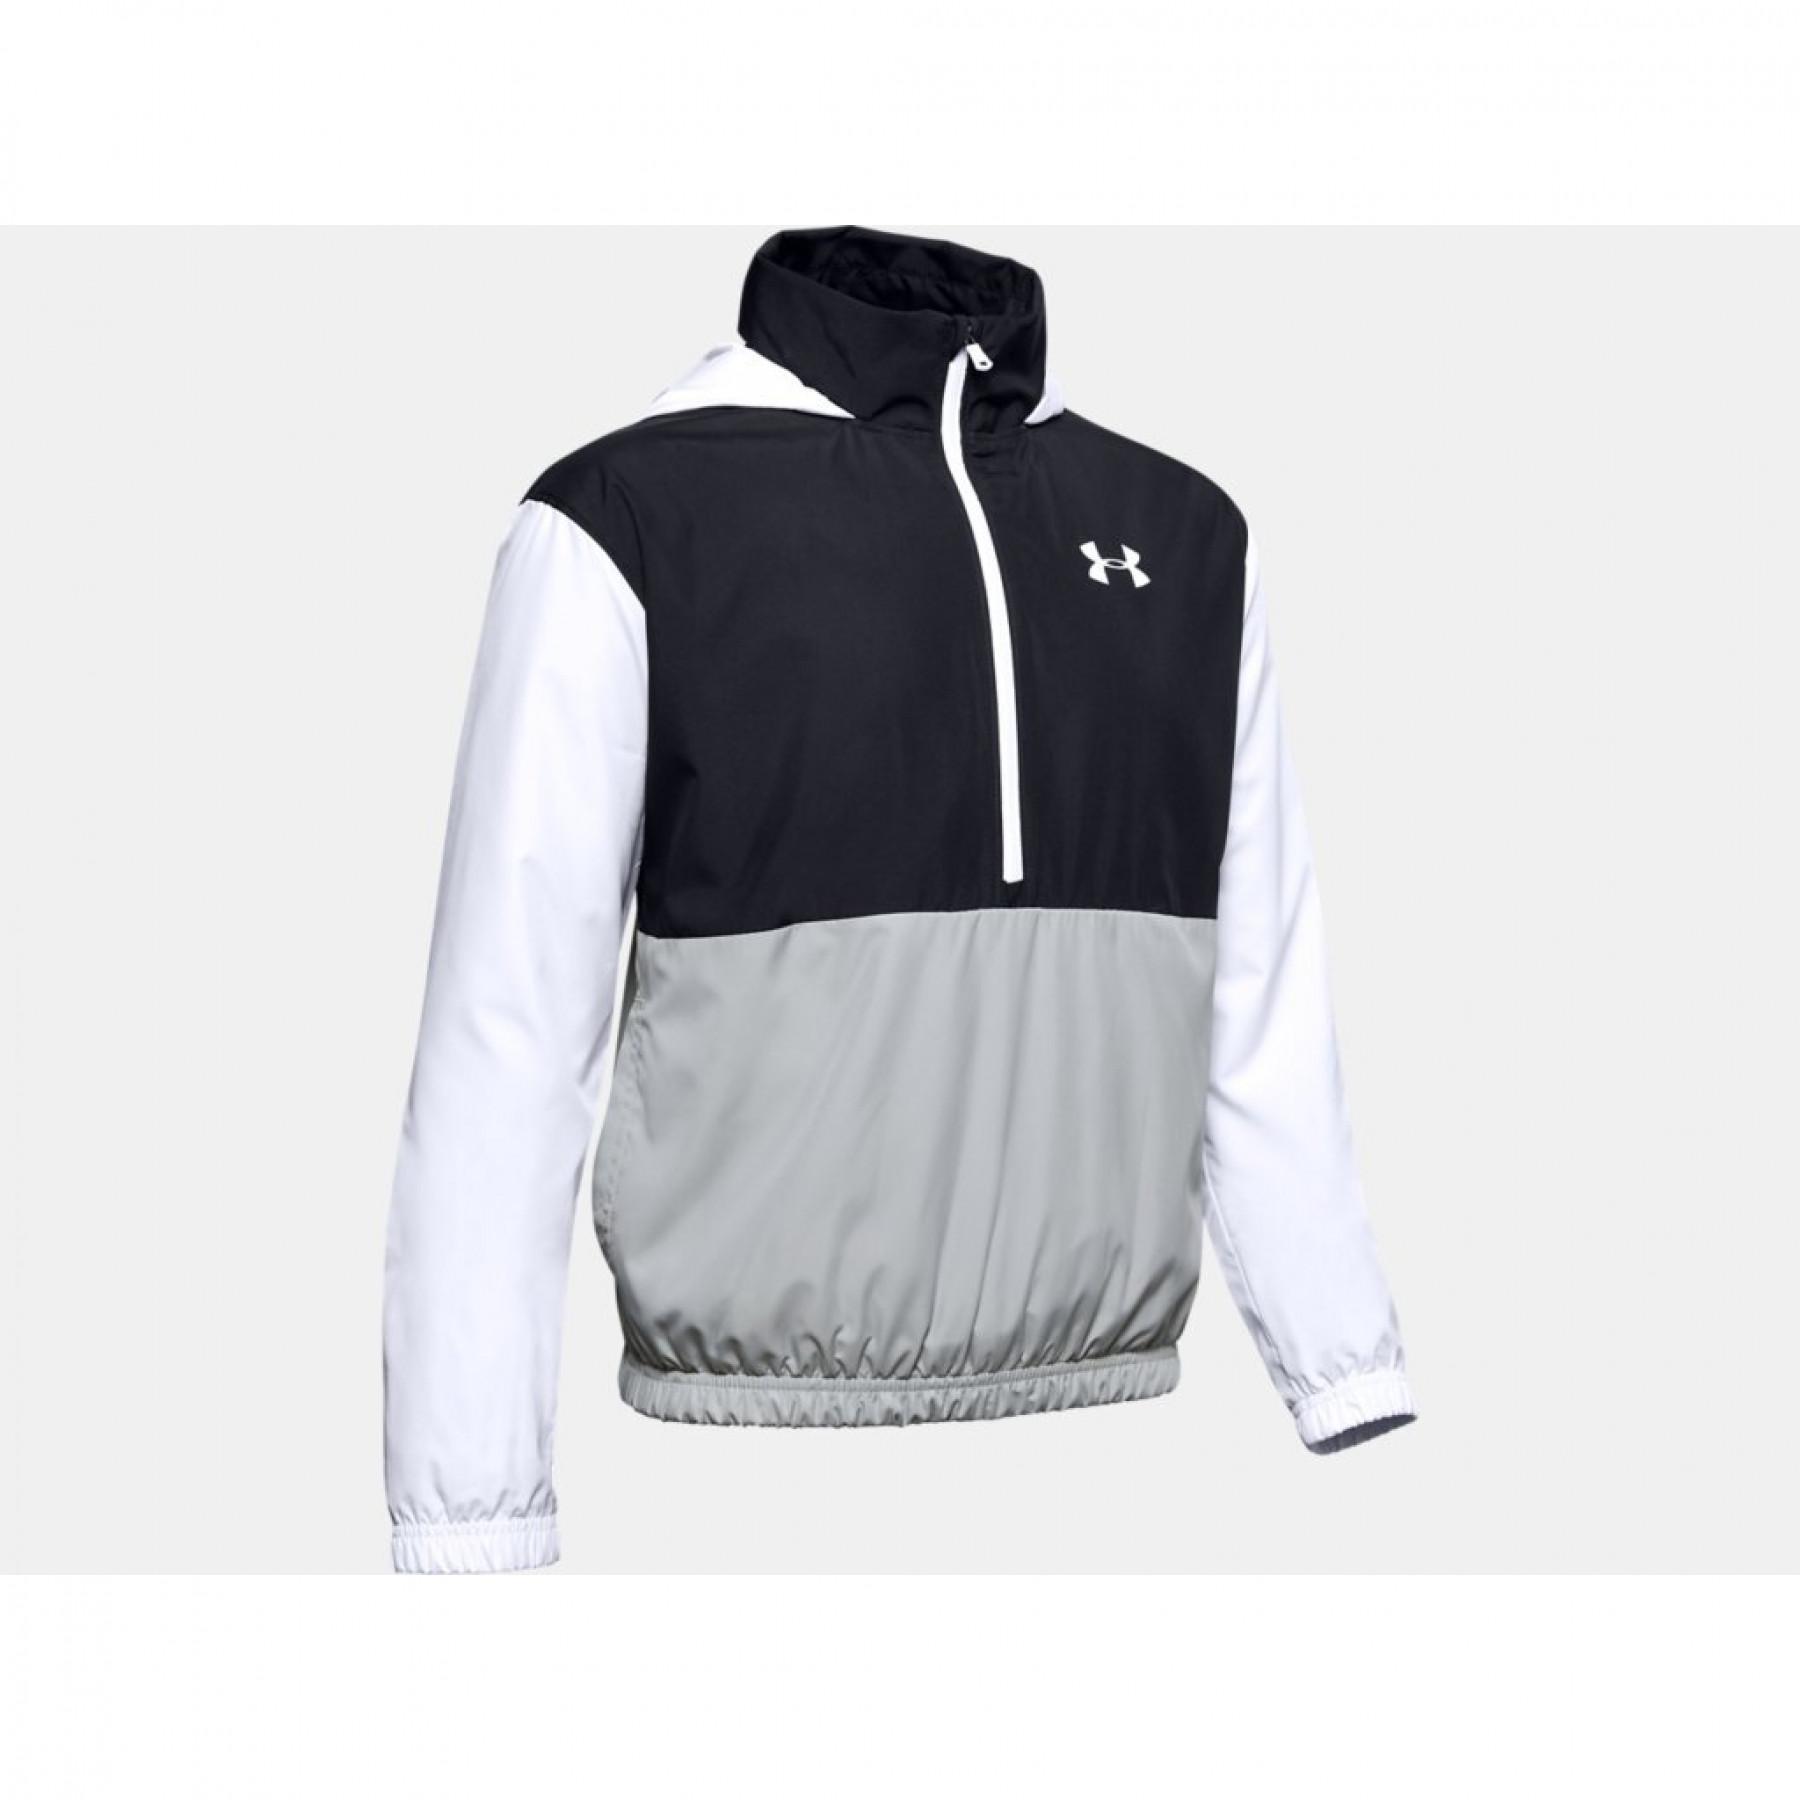 Boy's jacket Under Armour Mesh Lined